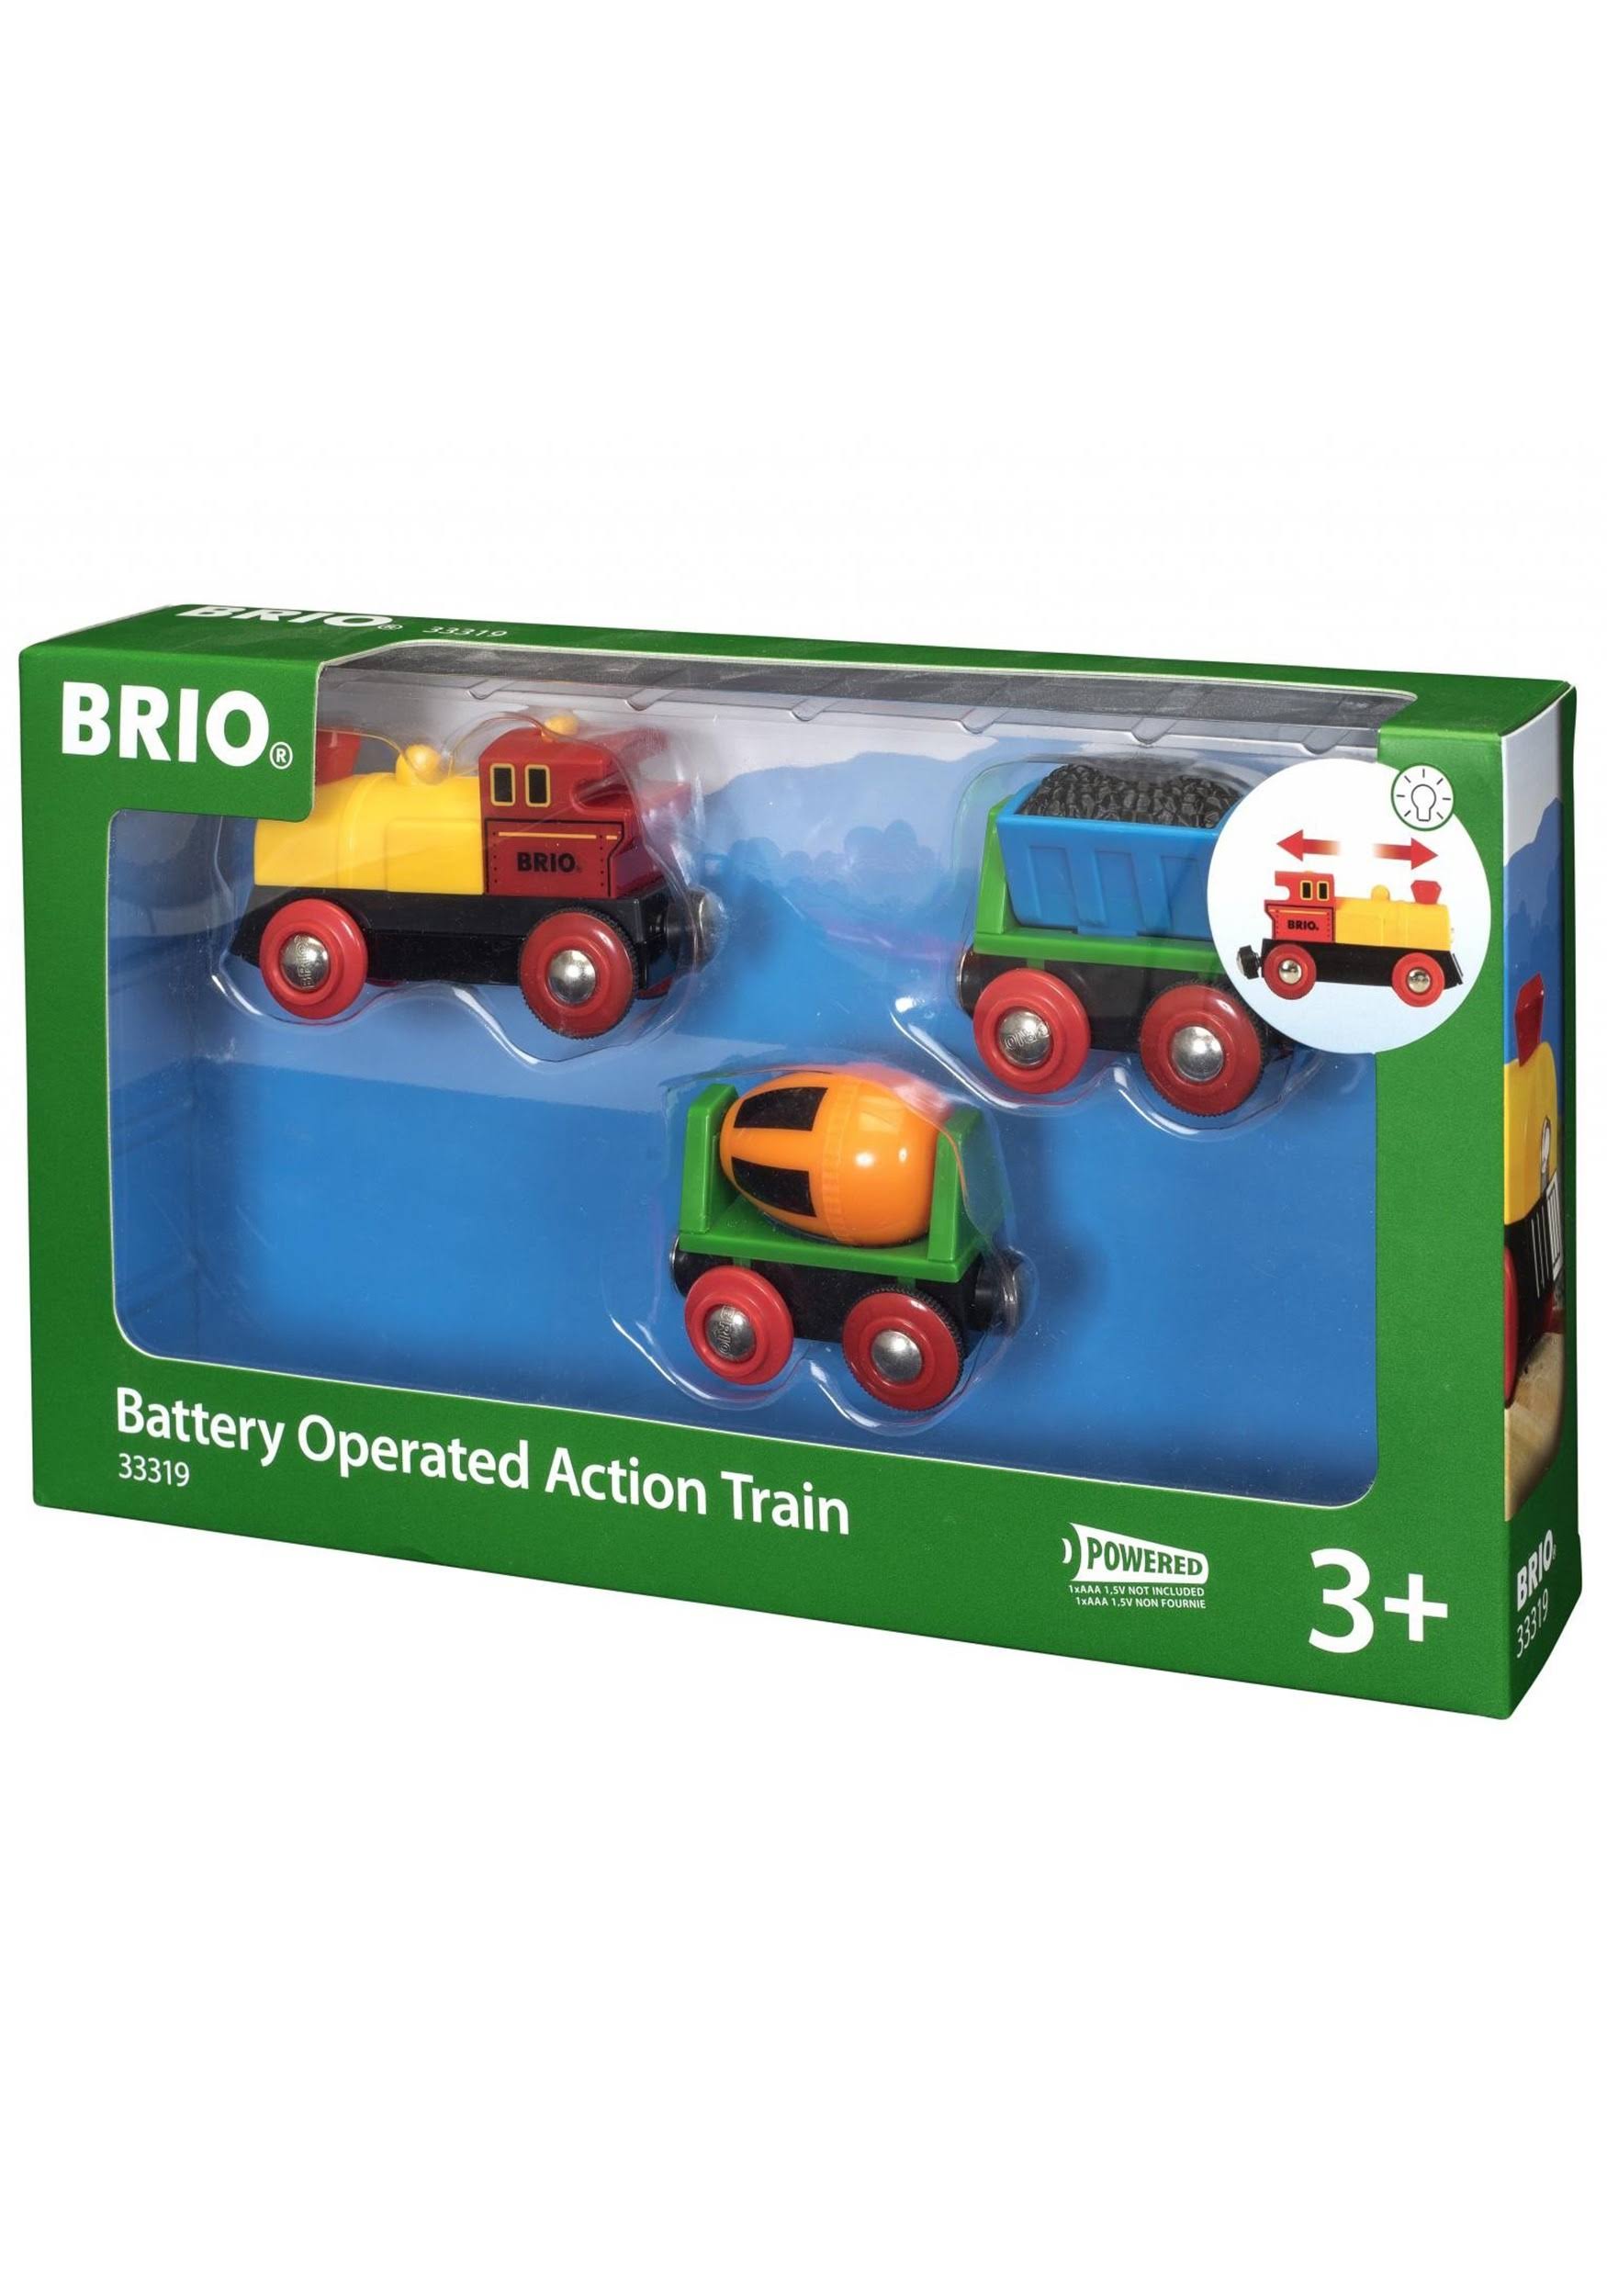 Brio Battery Operated Action Train Toy